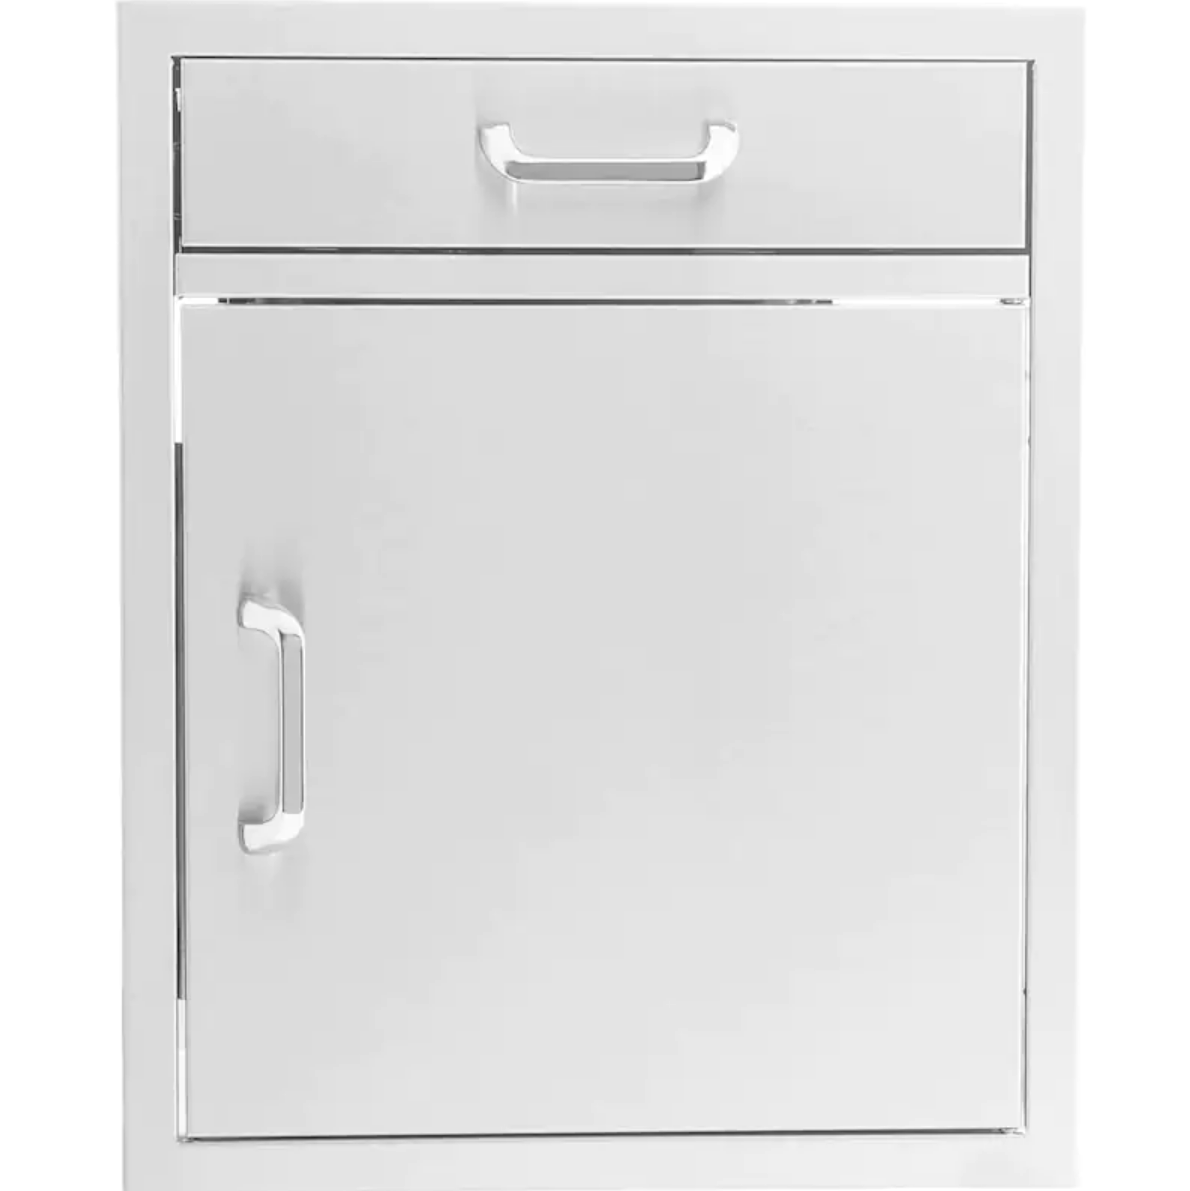 PCM 260 Series 21" Stainless Steel Single Access Door & Drawer Combo